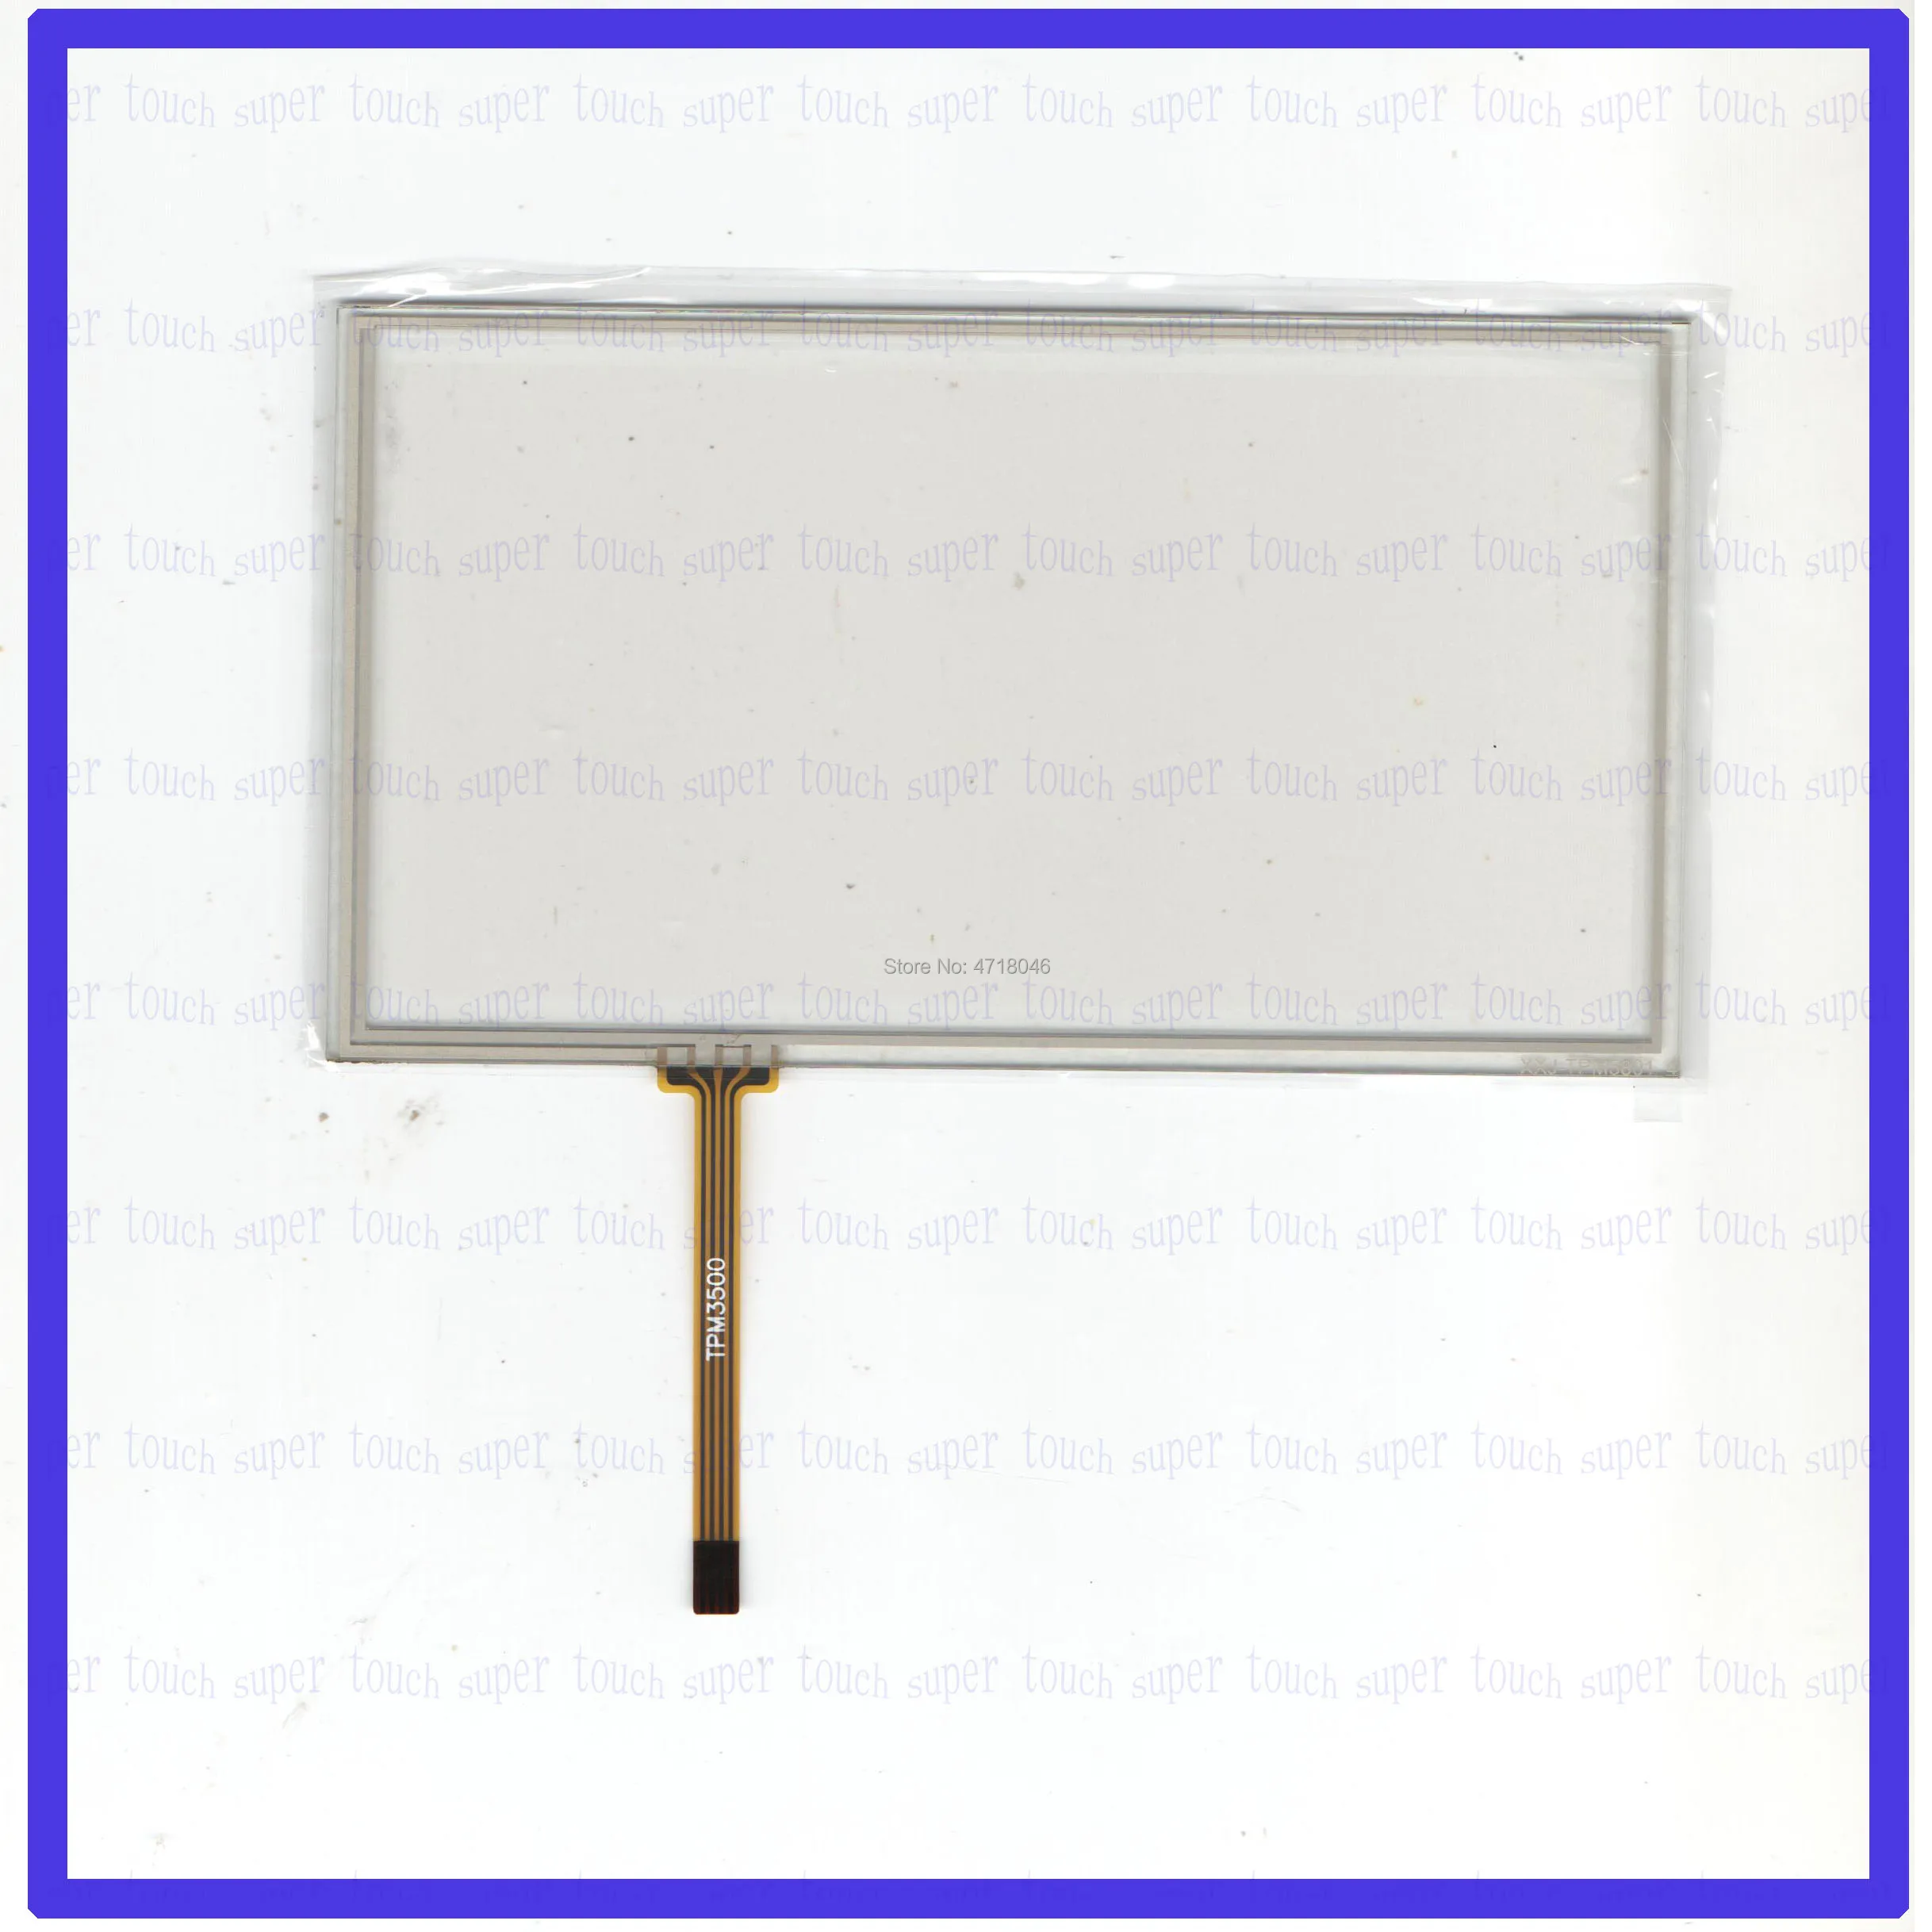 

ZXYS for Pioneer AVH-X1550DVD compatible touchglass 4lines resistance screen this is compatible Touchsensor